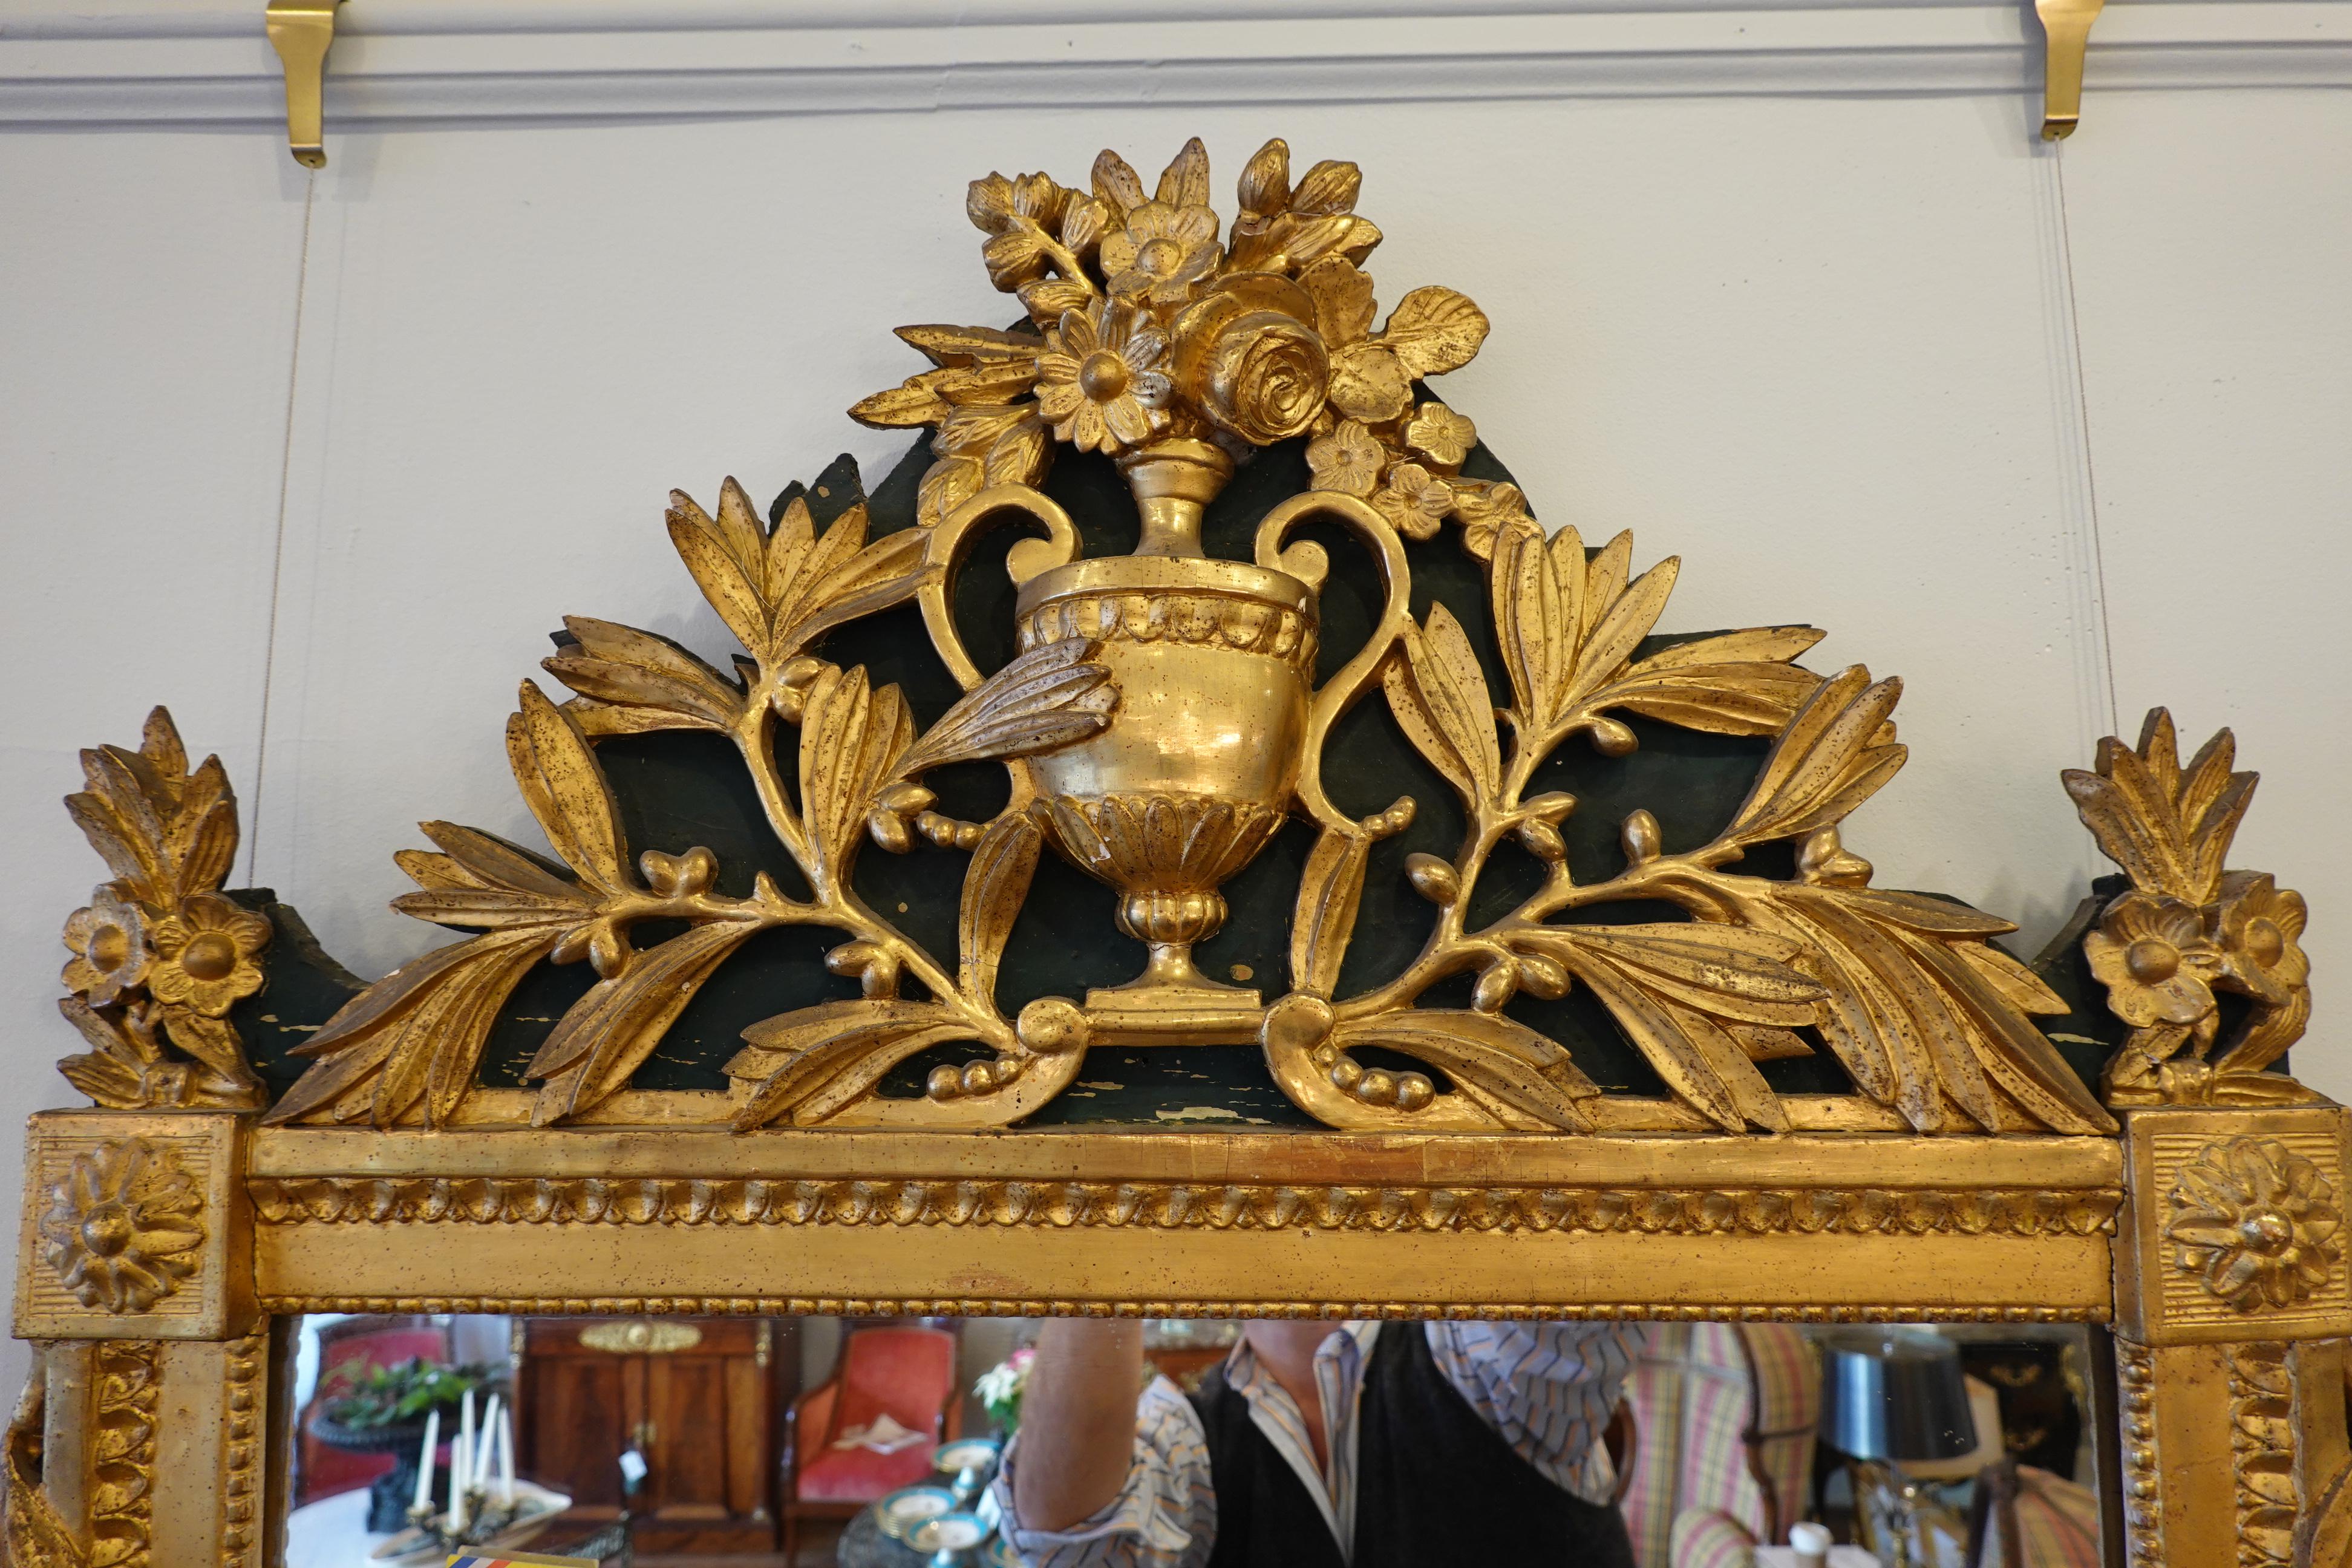 Wood Louis XVI Period Giltwood Trumeau Mirror with Urn, Flowers and Laurel Leaves For Sale